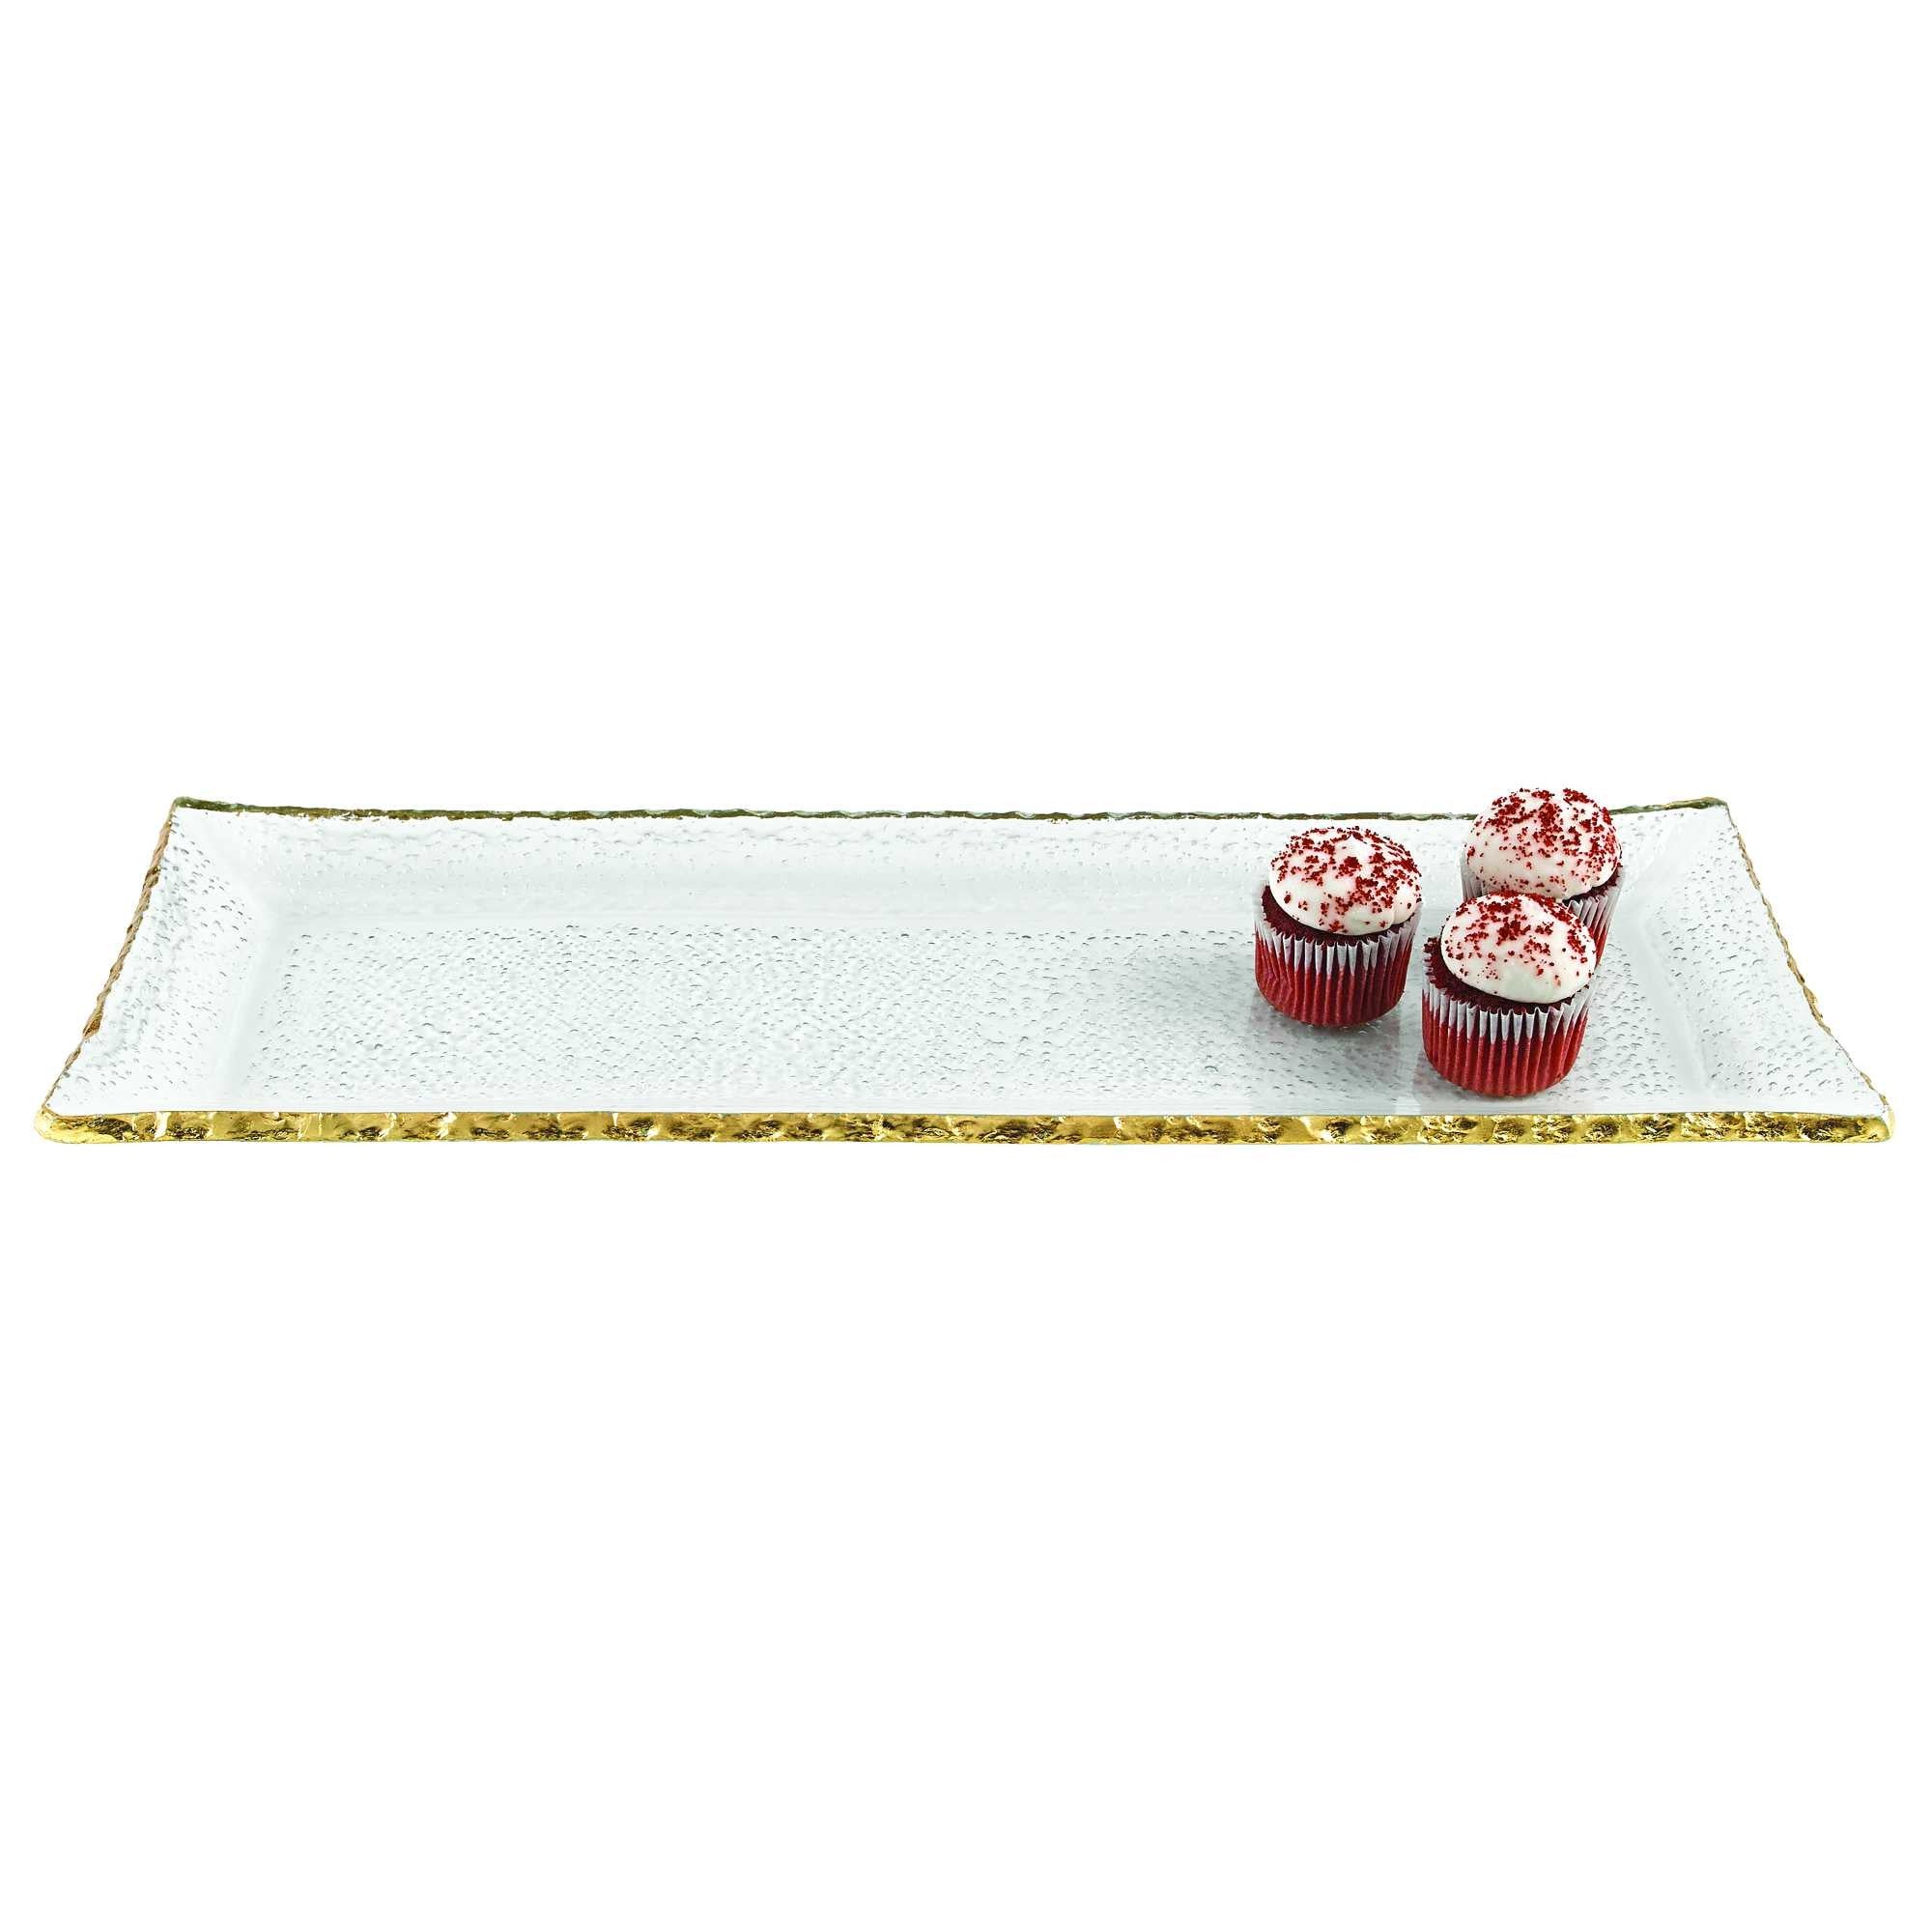 18 Mouth Blown Rectangular Edge Gold Leaf Serving Platter Or Tray - Tuesday Morning-Dinnerware